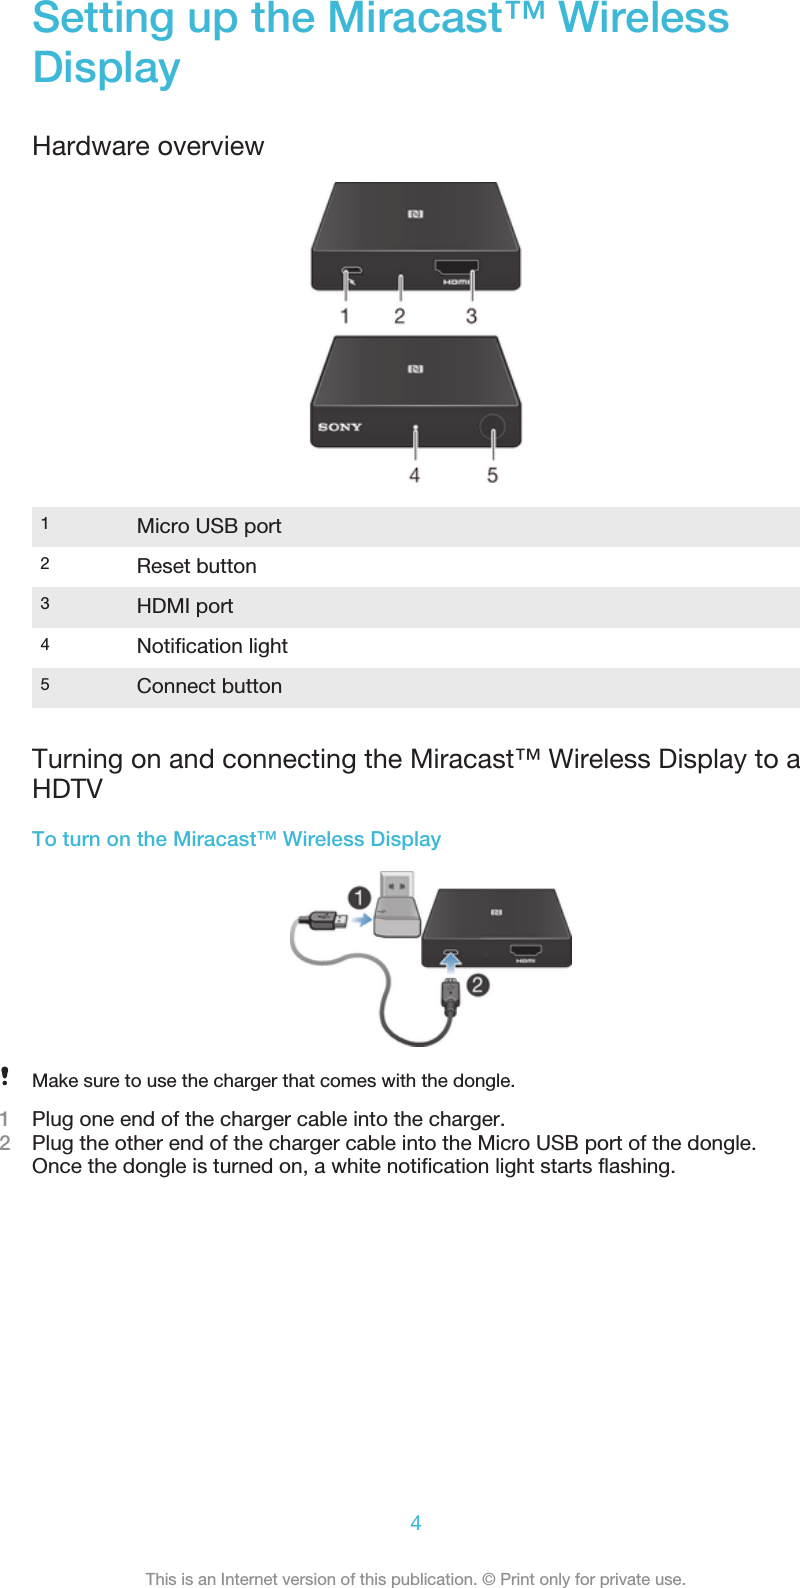 Setting up the Miracast™ WirelessDisplayHardware overview1Micro USB port2Reset button3HDMI port4Notification light5Connect buttonTurning on and connecting the Miracast™ Wireless Display to aHDTVTo turn on the Miracast™ Wireless DisplayMake sure to use the charger that comes with the dongle.1Plug one end of the charger cable into the charger.2Plug the other end of the charger cable into the Micro USB port of the dongle.Once the dongle is turned on, a white notification light starts flashing.4This is an Internet version of this publication. © Print only for private use.